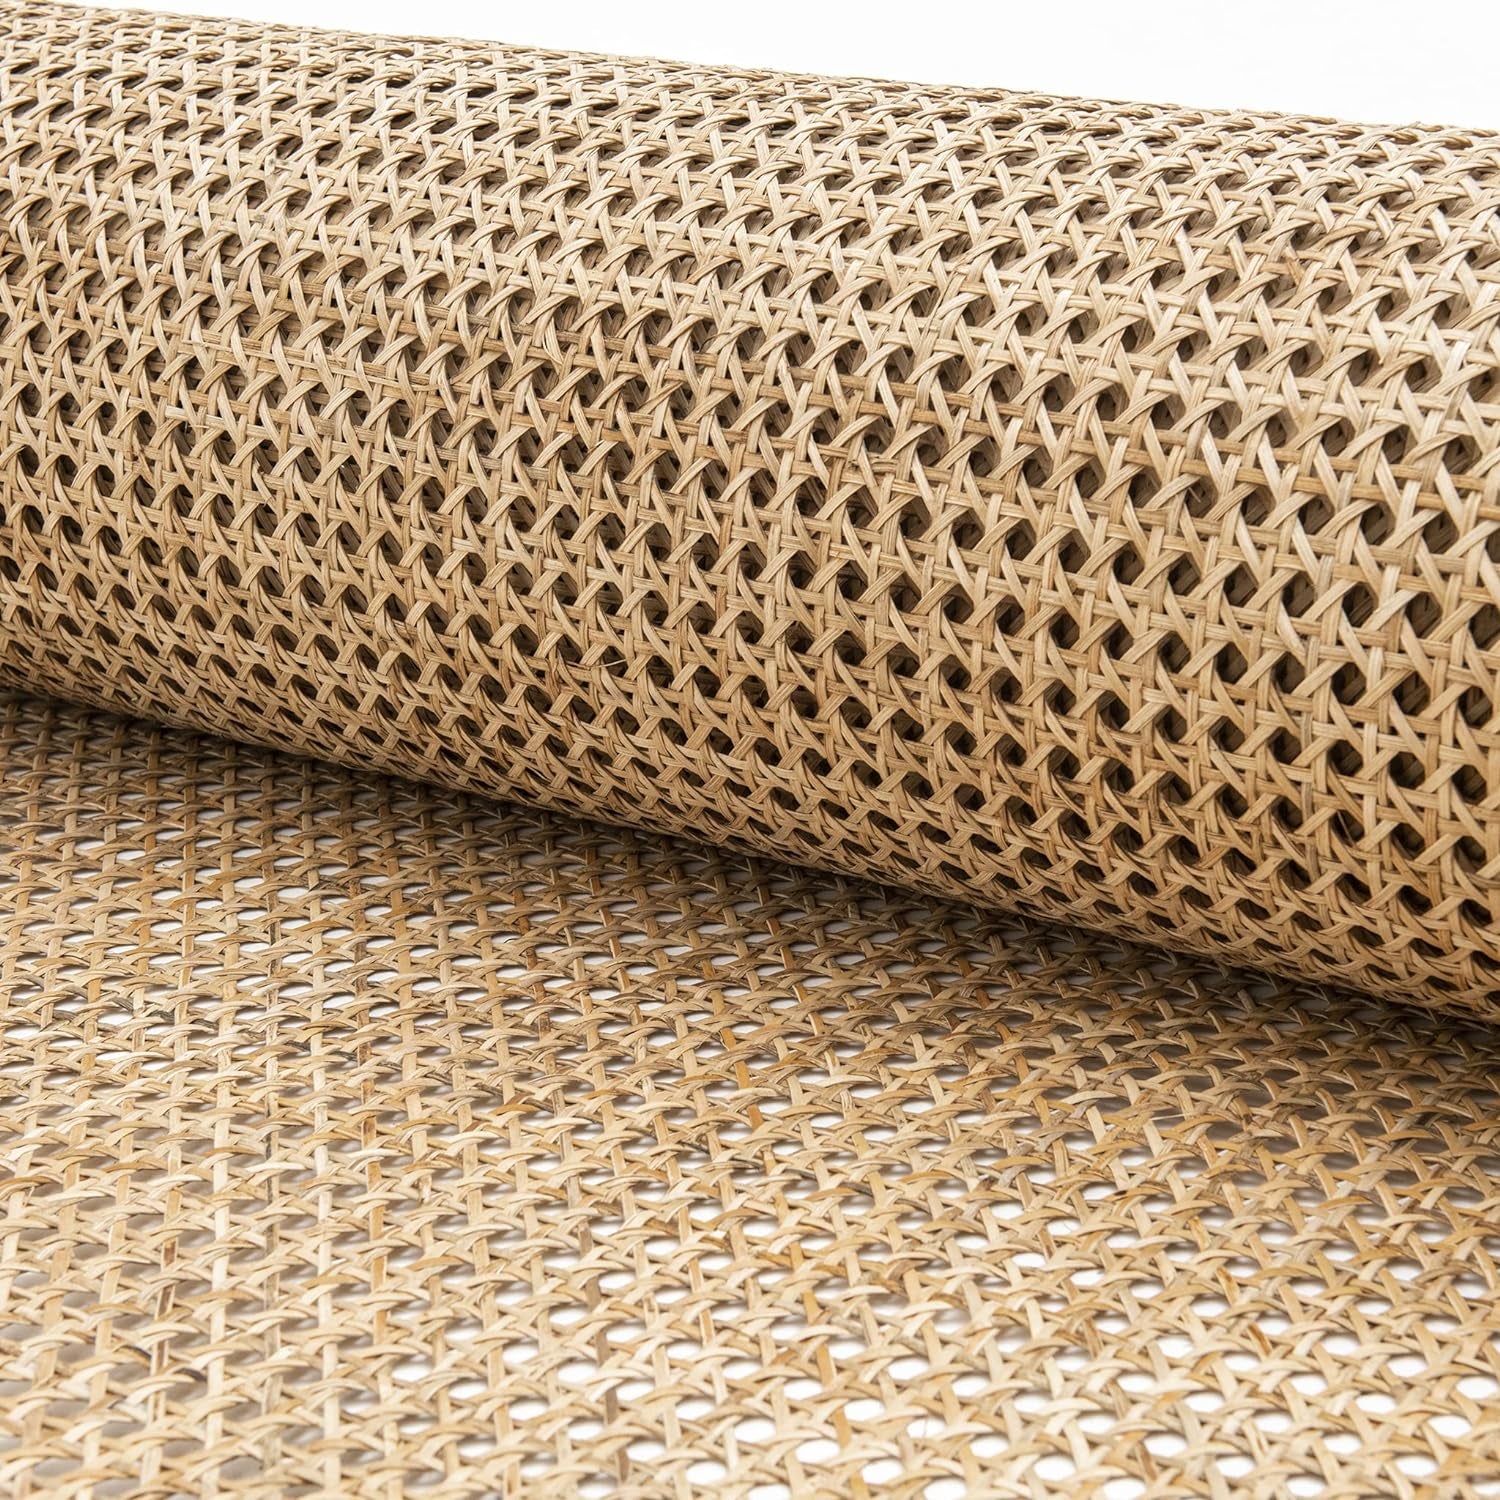 24" Width Natural Rattan Webbing for Caning Projects | 24" W X 5 Ft L | Pre-Woven Open Mesh Cane - Cane Webbing Sheet- Natural Rattan Cane Webbing Roll (5 FEET)